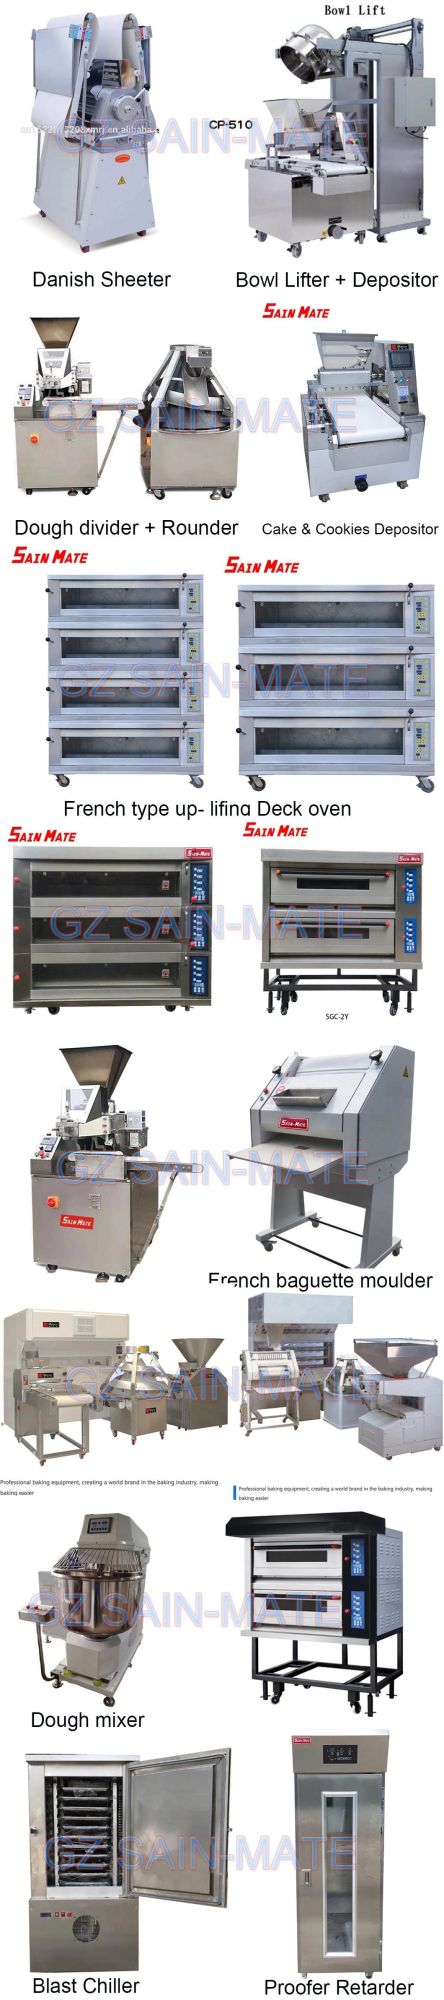 32 Trays Rotary Rack Oven in Guangzhou Factory 32 Trays Hot Air Rotary Oven Big Capacity